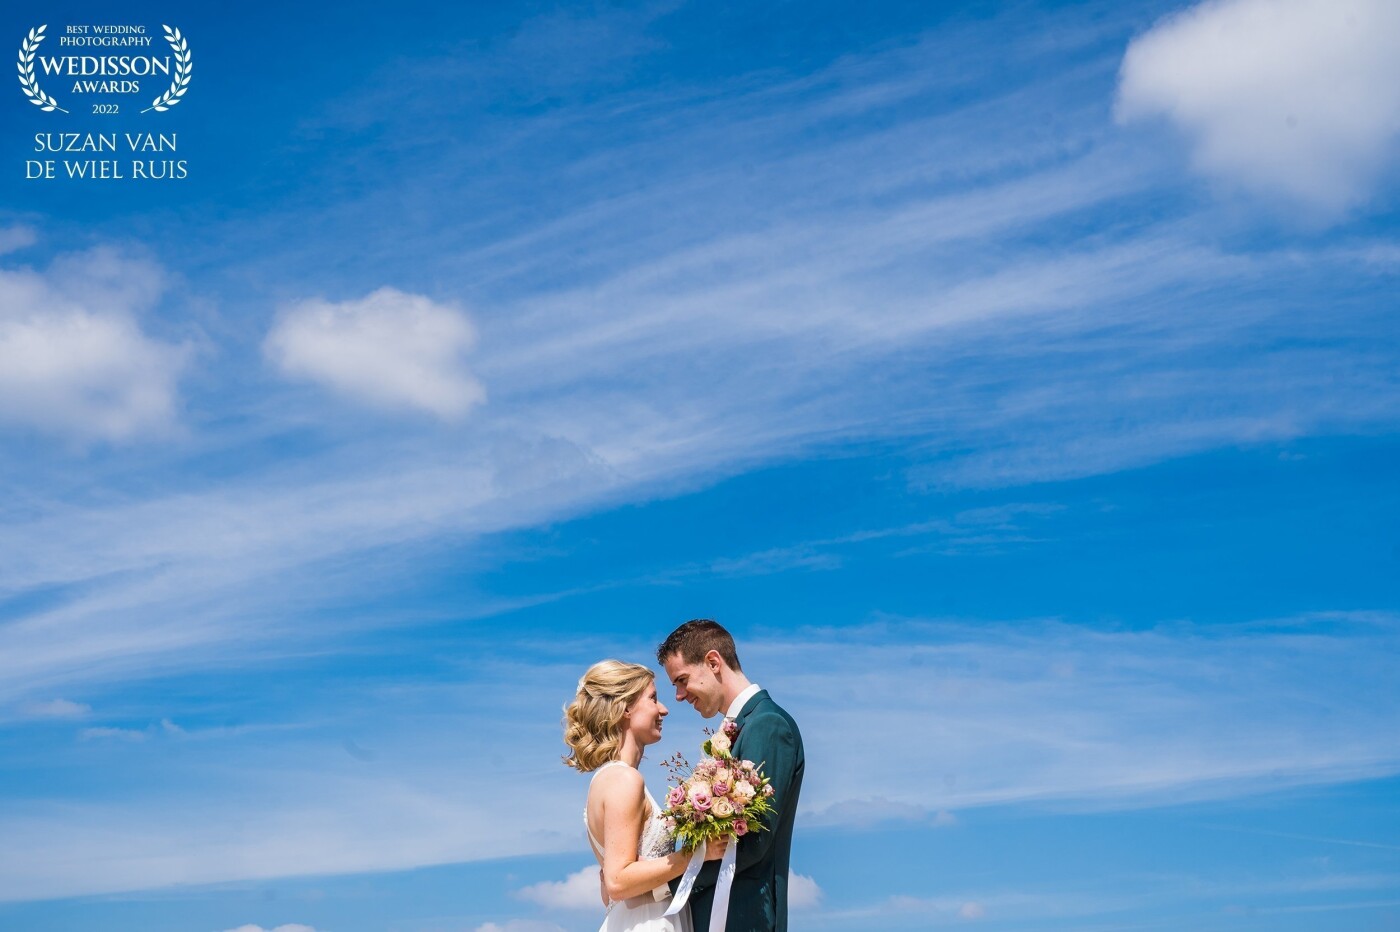 We just love beautiful bright colors in our wedding portraits. This beautiful sky and the gorgeous couple really pop, we used a little flash to keep the vibrant blue of the sky.